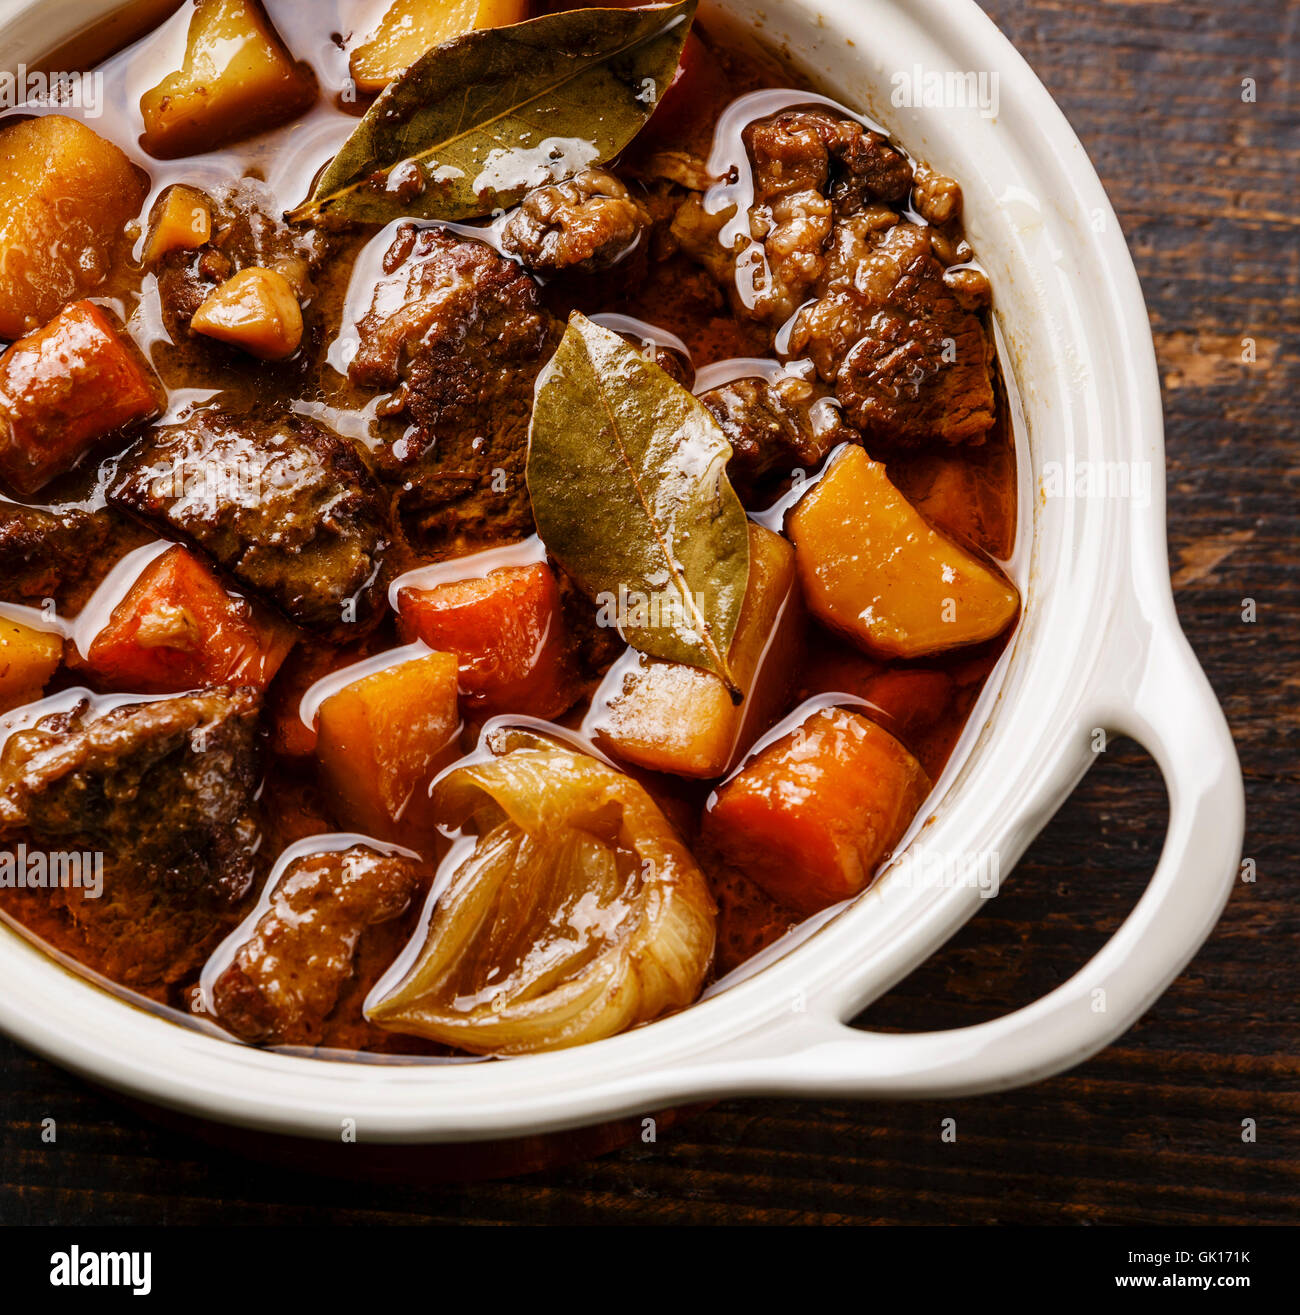 Beef meat stewed with potatoes, carrots and spices in ceramic pot close up Stock Photo